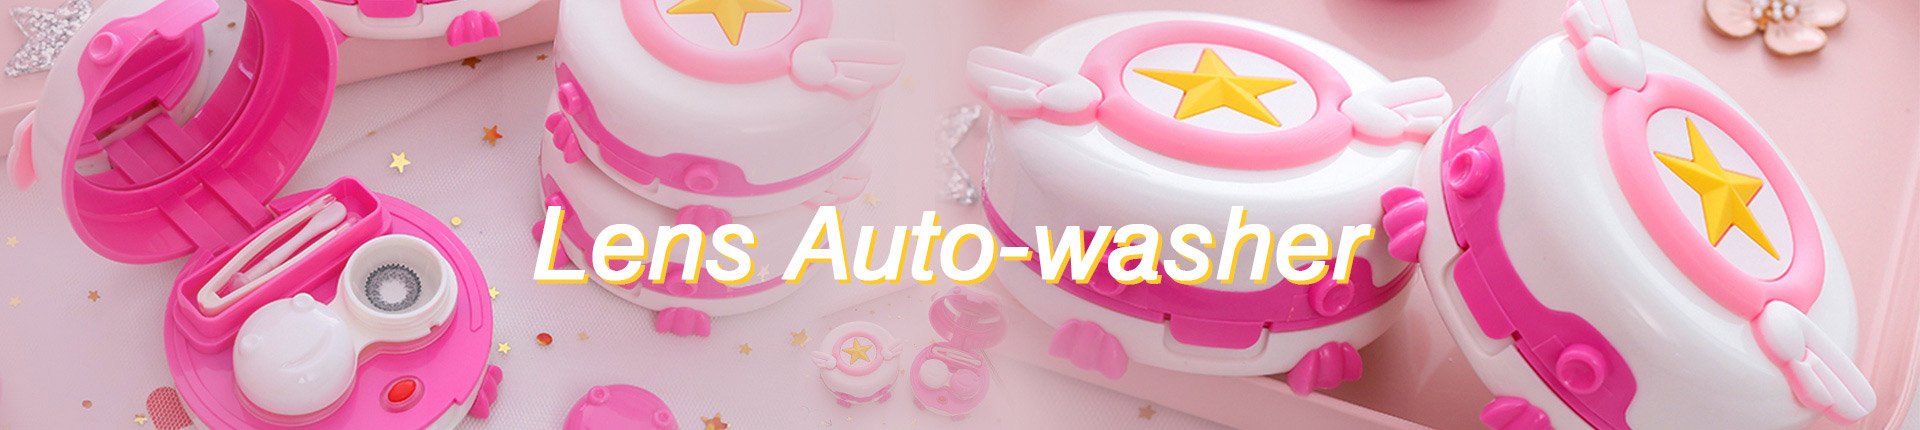 Lens Auto-Washer